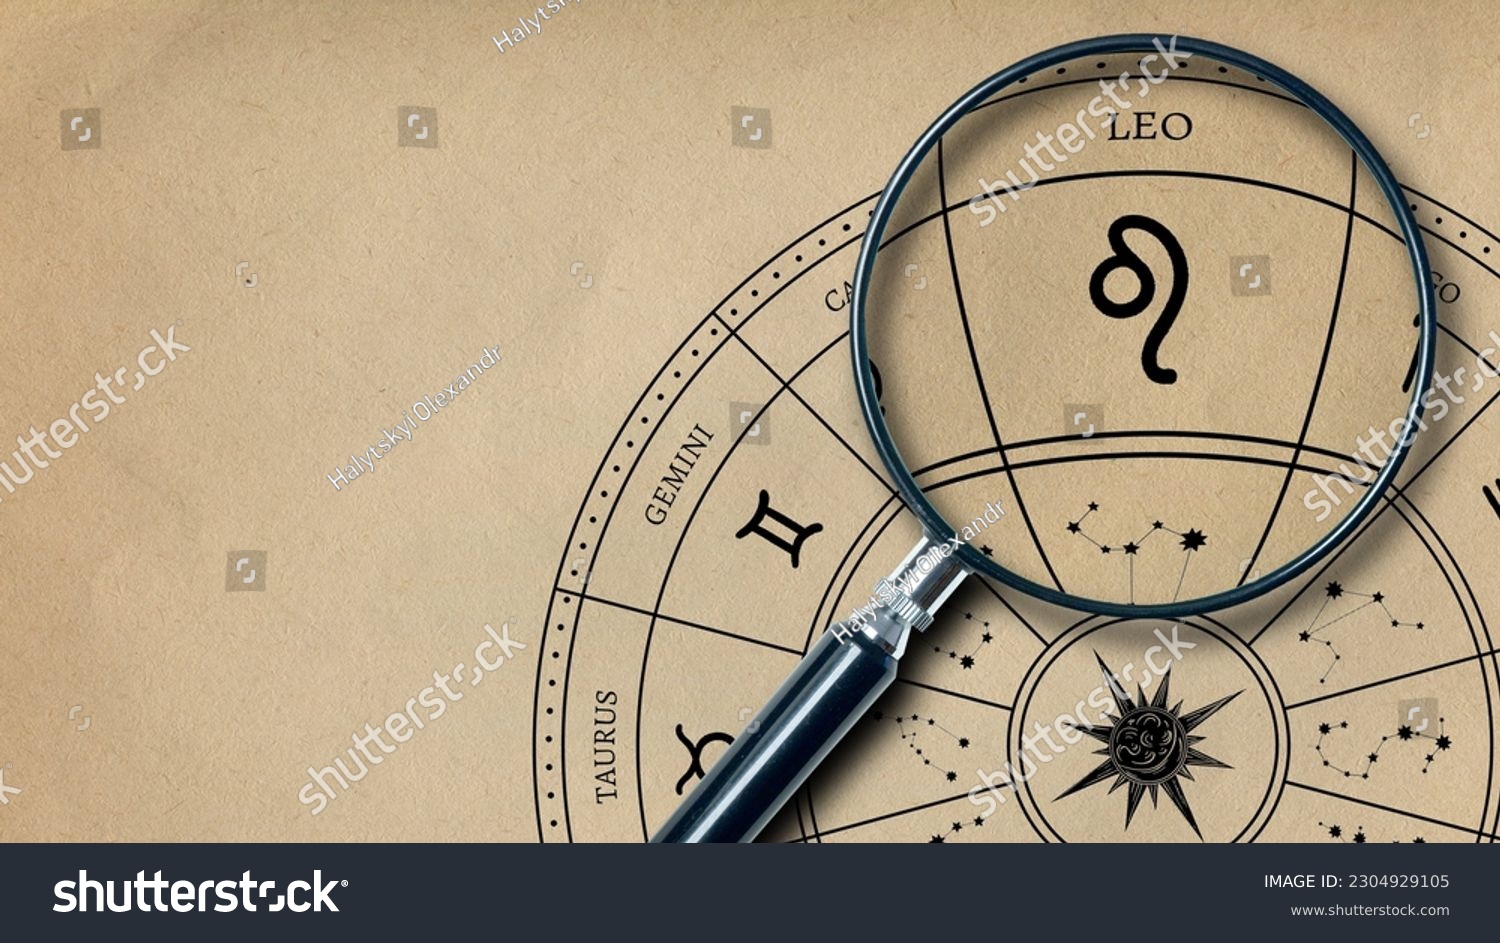 The imprint of the zodiac sign Leo on old paper is enlarged with a lens #2304929105